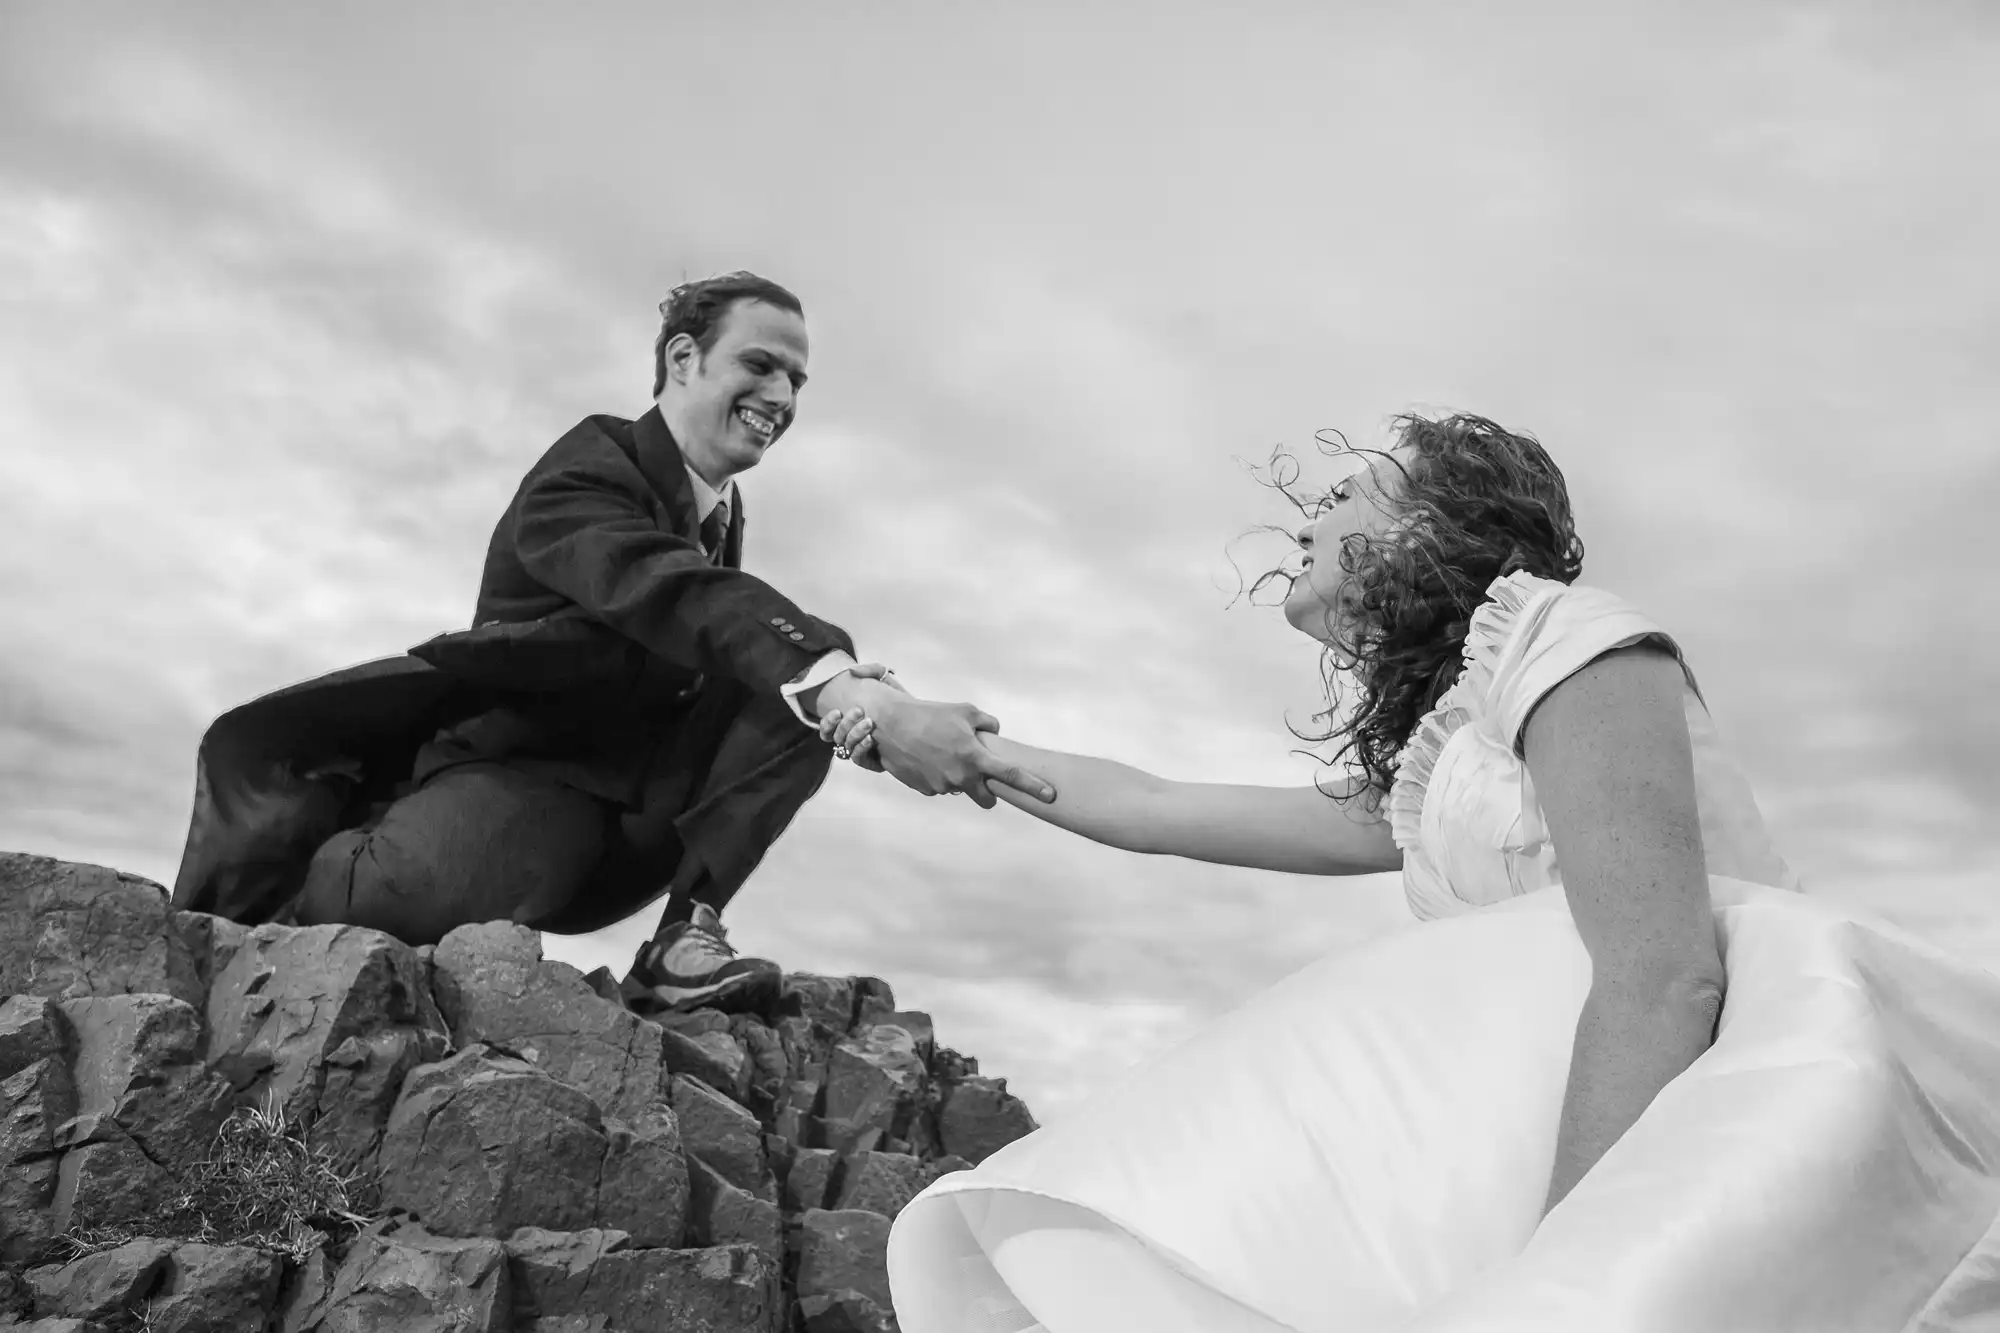 A black and white photo of a joyful bride and groom holding hands, with the groom on a higher rock ledge, pulling the bride upwards as she climbs.